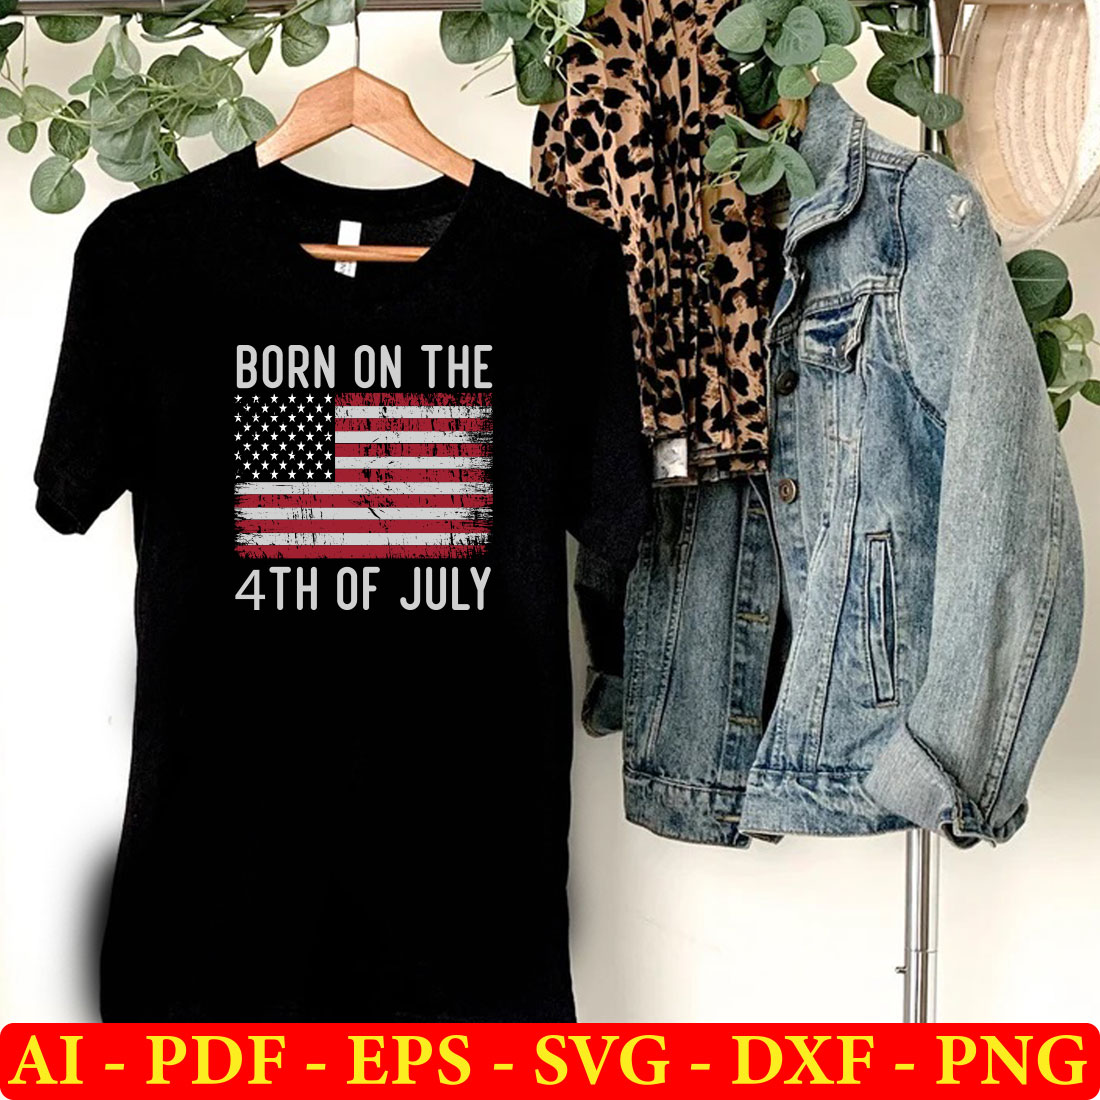 T - shirt that says born on the 4th of july with an american flag.